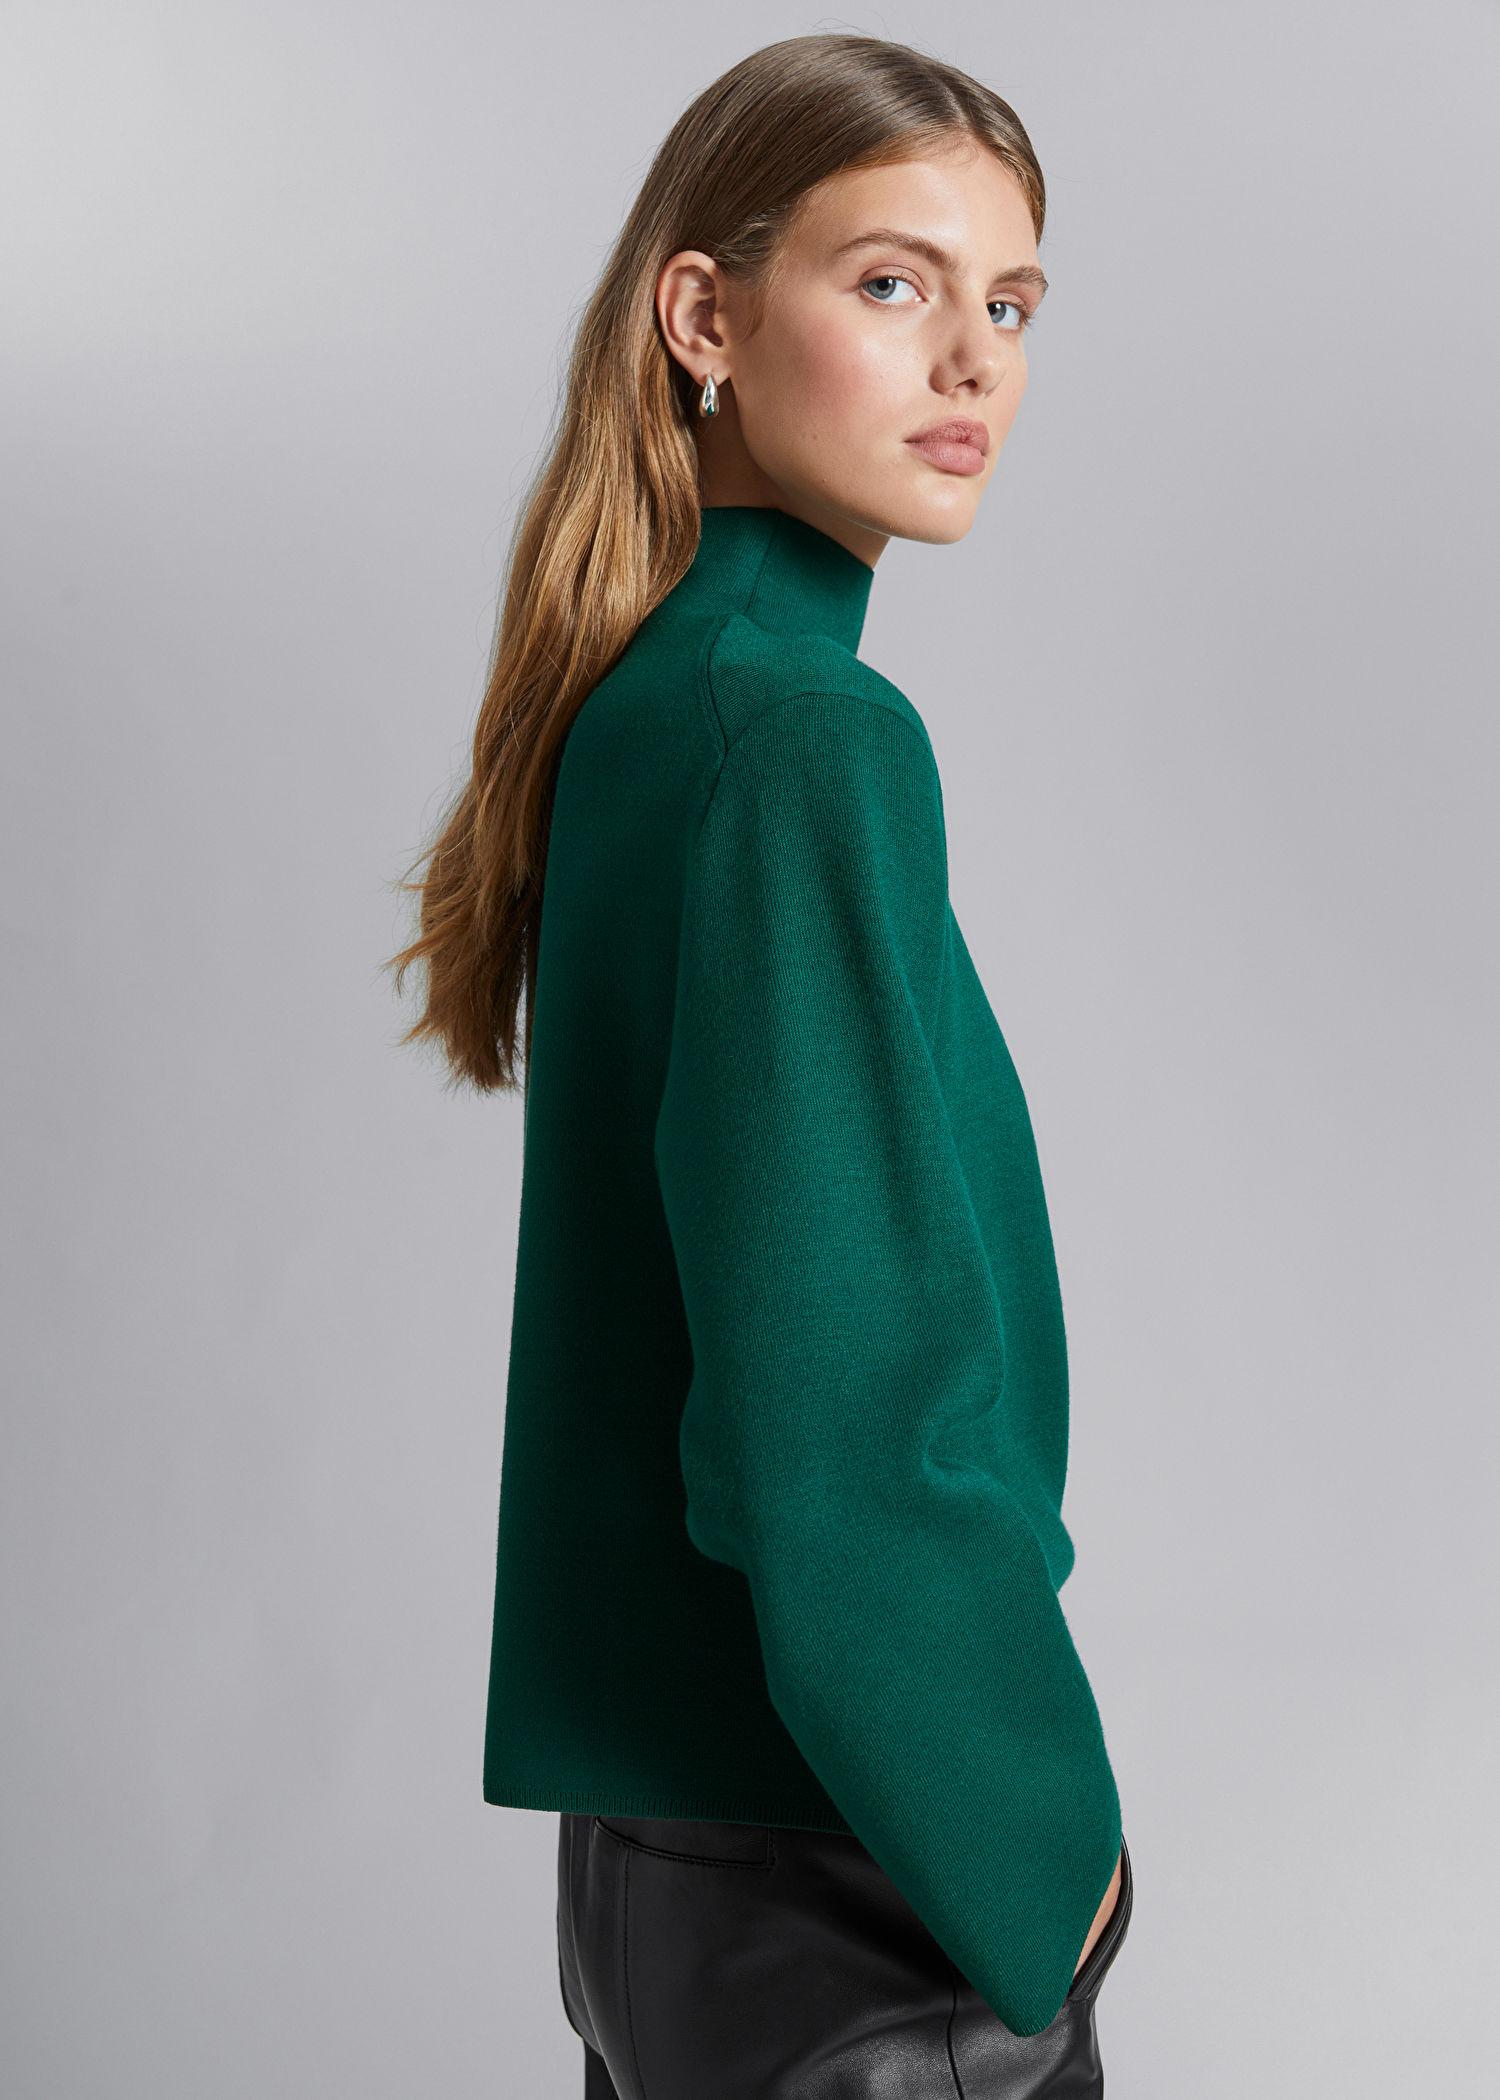 & Other Stories Boxy Turtleneck Knit Jumper in Green | Lyst UK